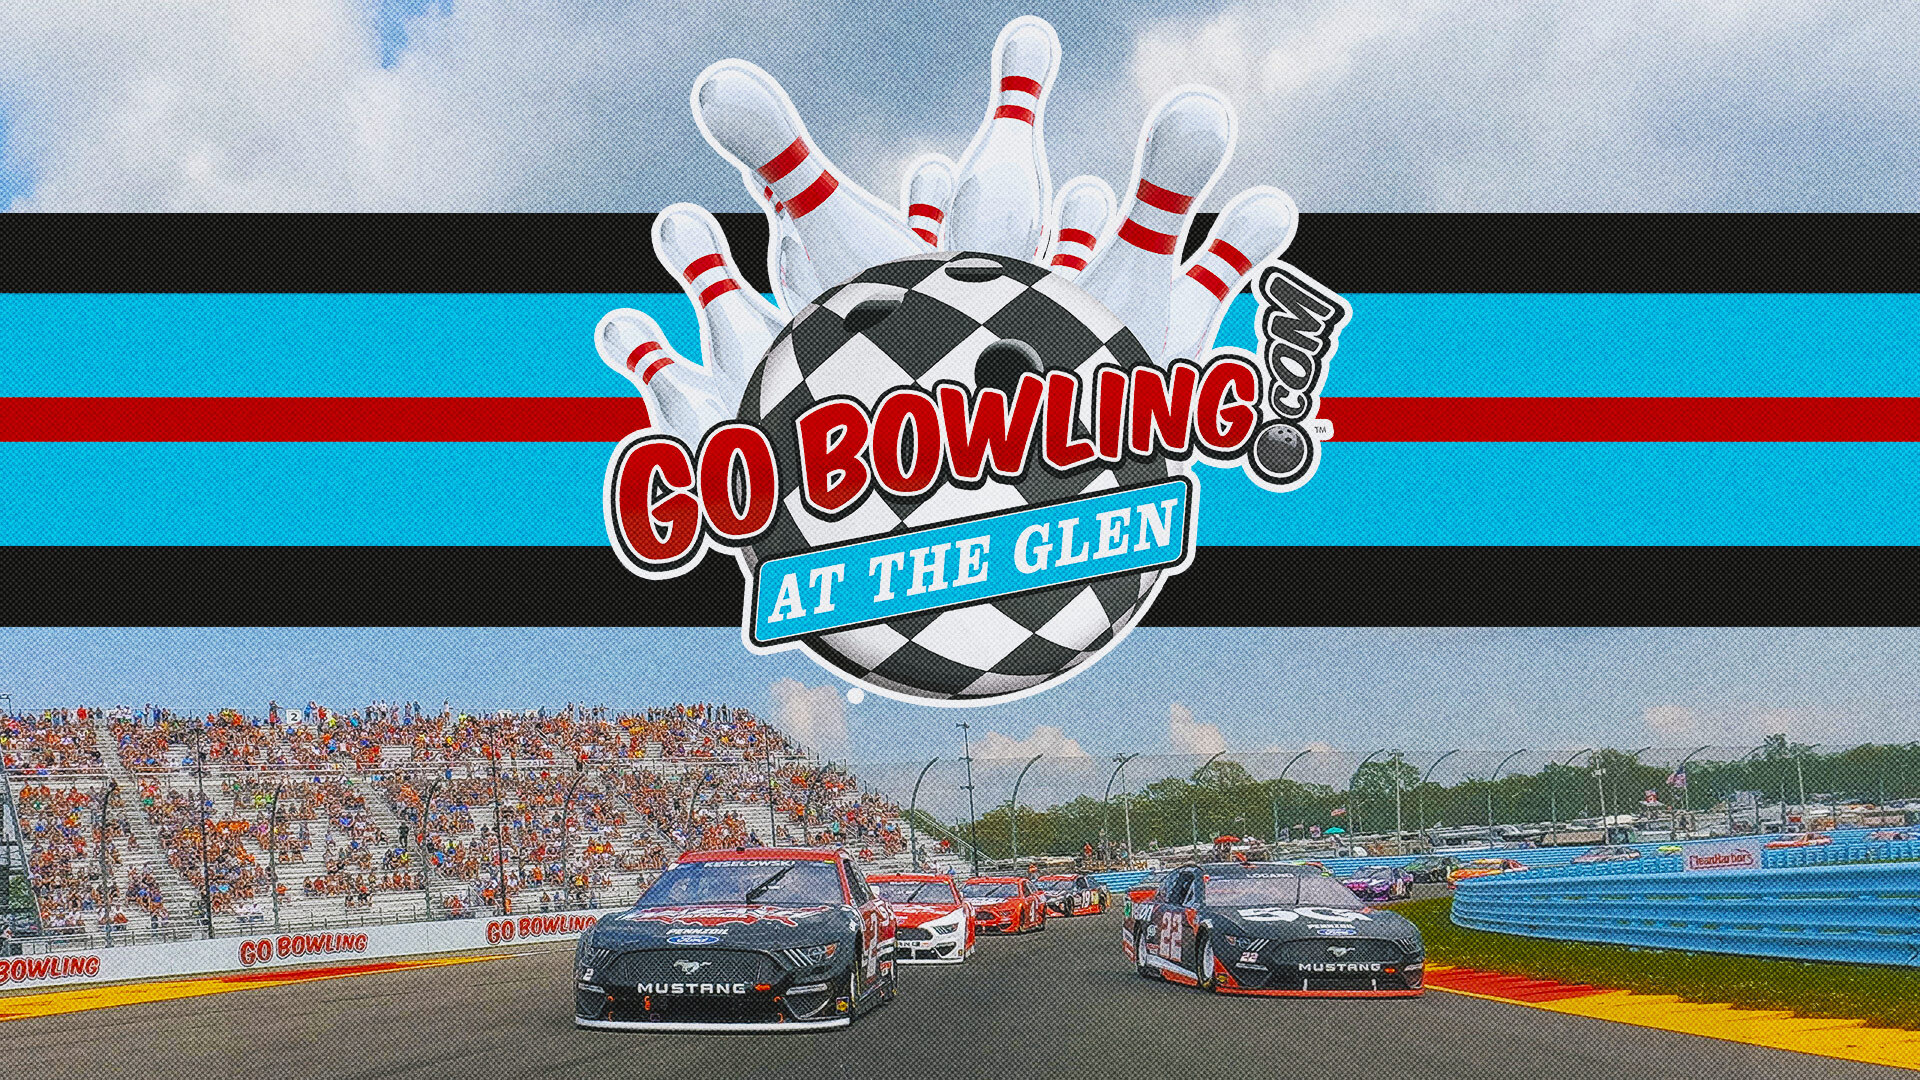 2022 Go Bowling at The Glen August 21, 2022 NASCAR FOX Sports